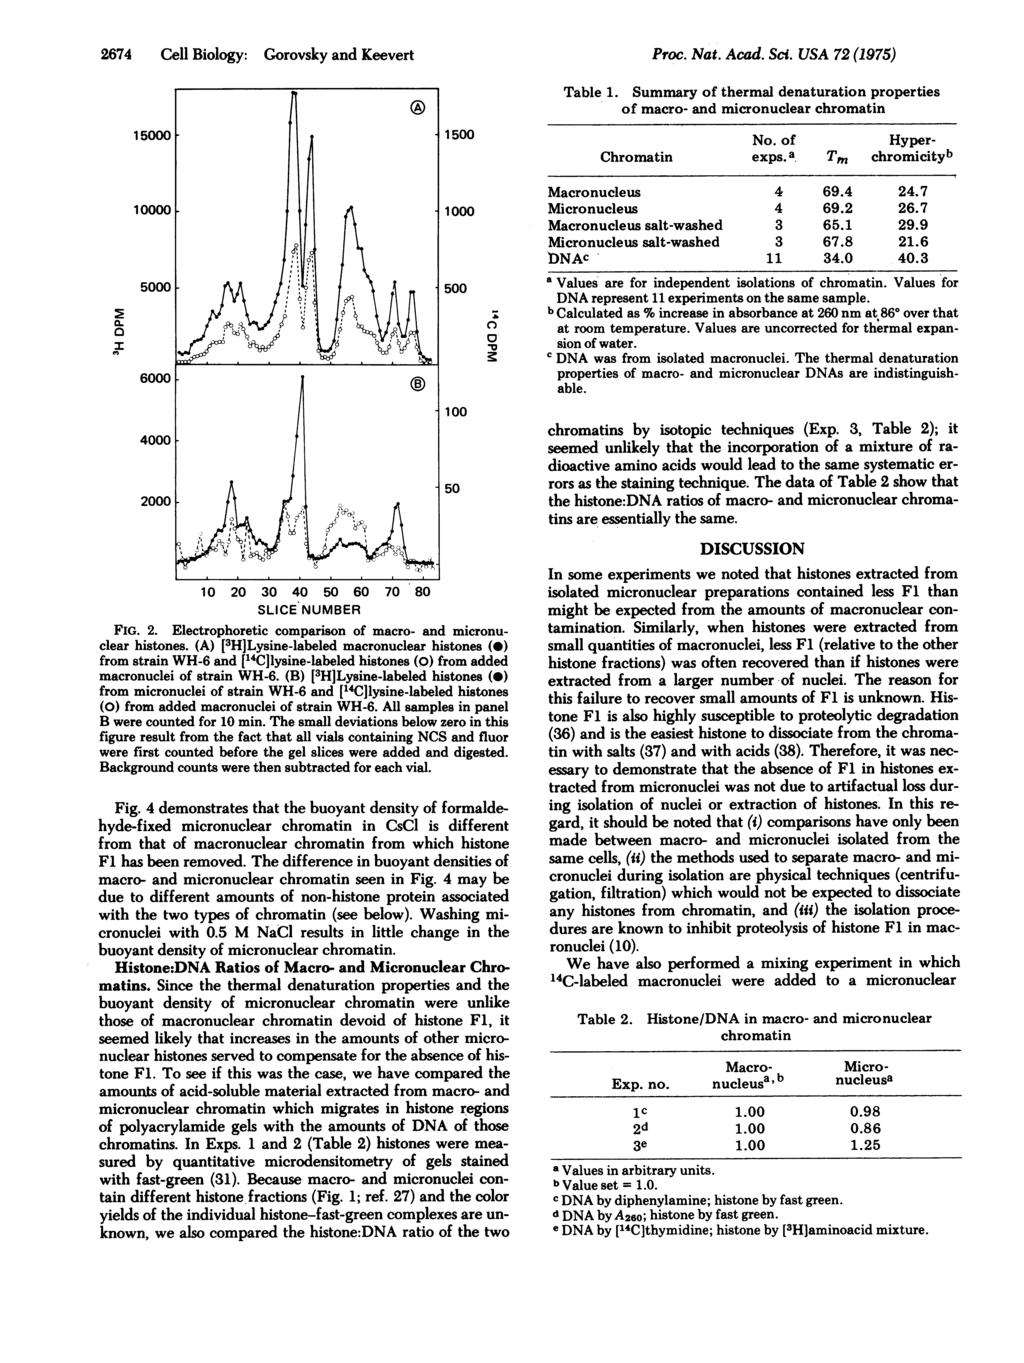 2674 Cell Biology: Gorovsky and Keevert Proc. Nat. Acad. Sci. USA 72 (1975). al 15 1 5 1 1 2 3 4 5 6 7 8 SLICE NUMBER FIG. 2. Electrophoretic comparison of macro- and micronuclear histones.